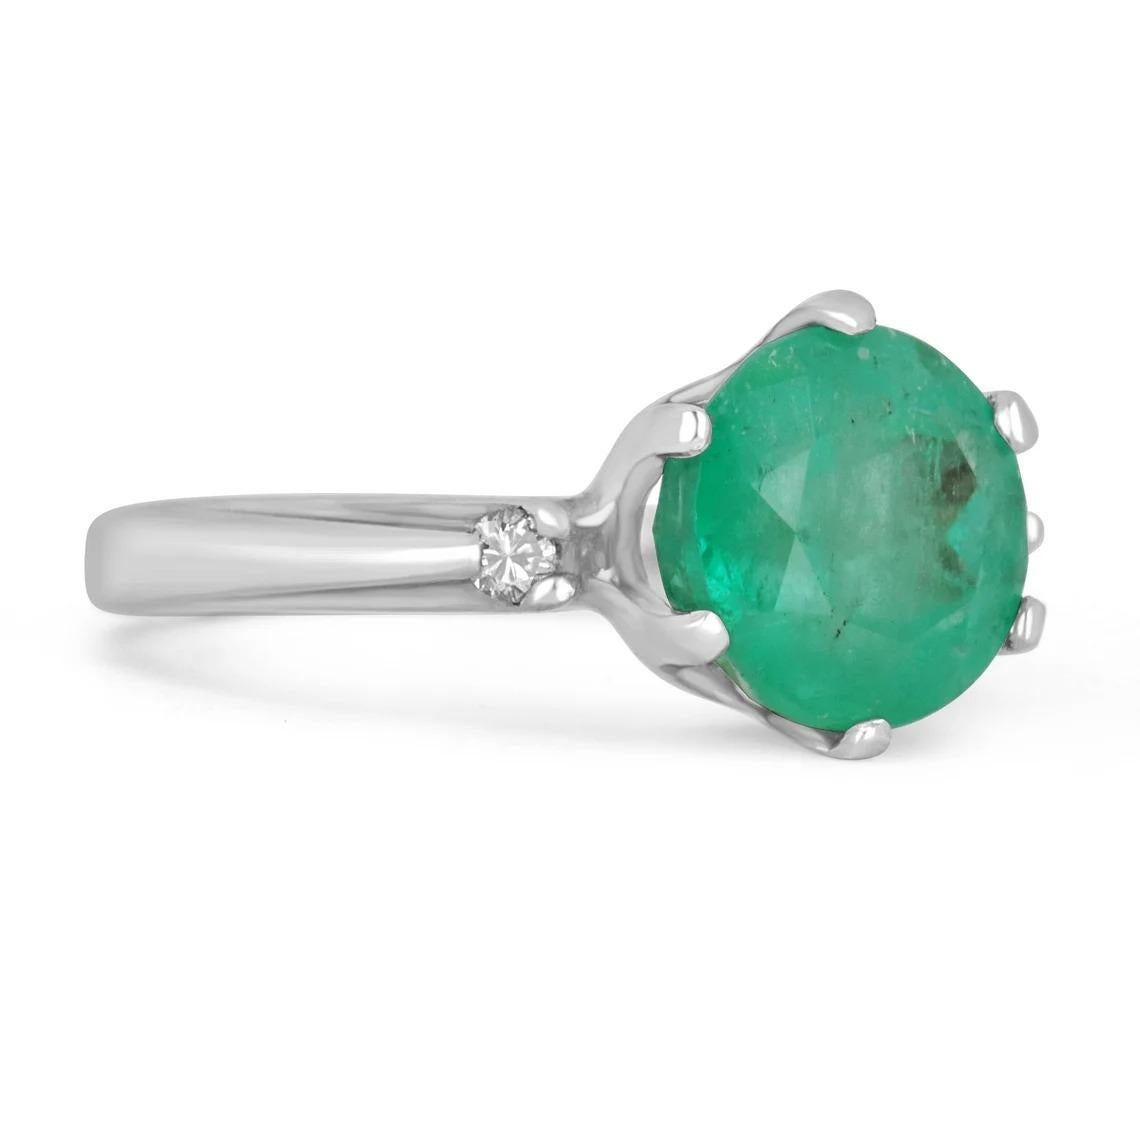 A simple, emerald and diamond three stone. The center stone carries a full, 3.19-carat round cut Colombian emerald. The stone displays a beautiful medium yellowish-green color and good eye clarity. The gemstone is slightly opaque from within, yet